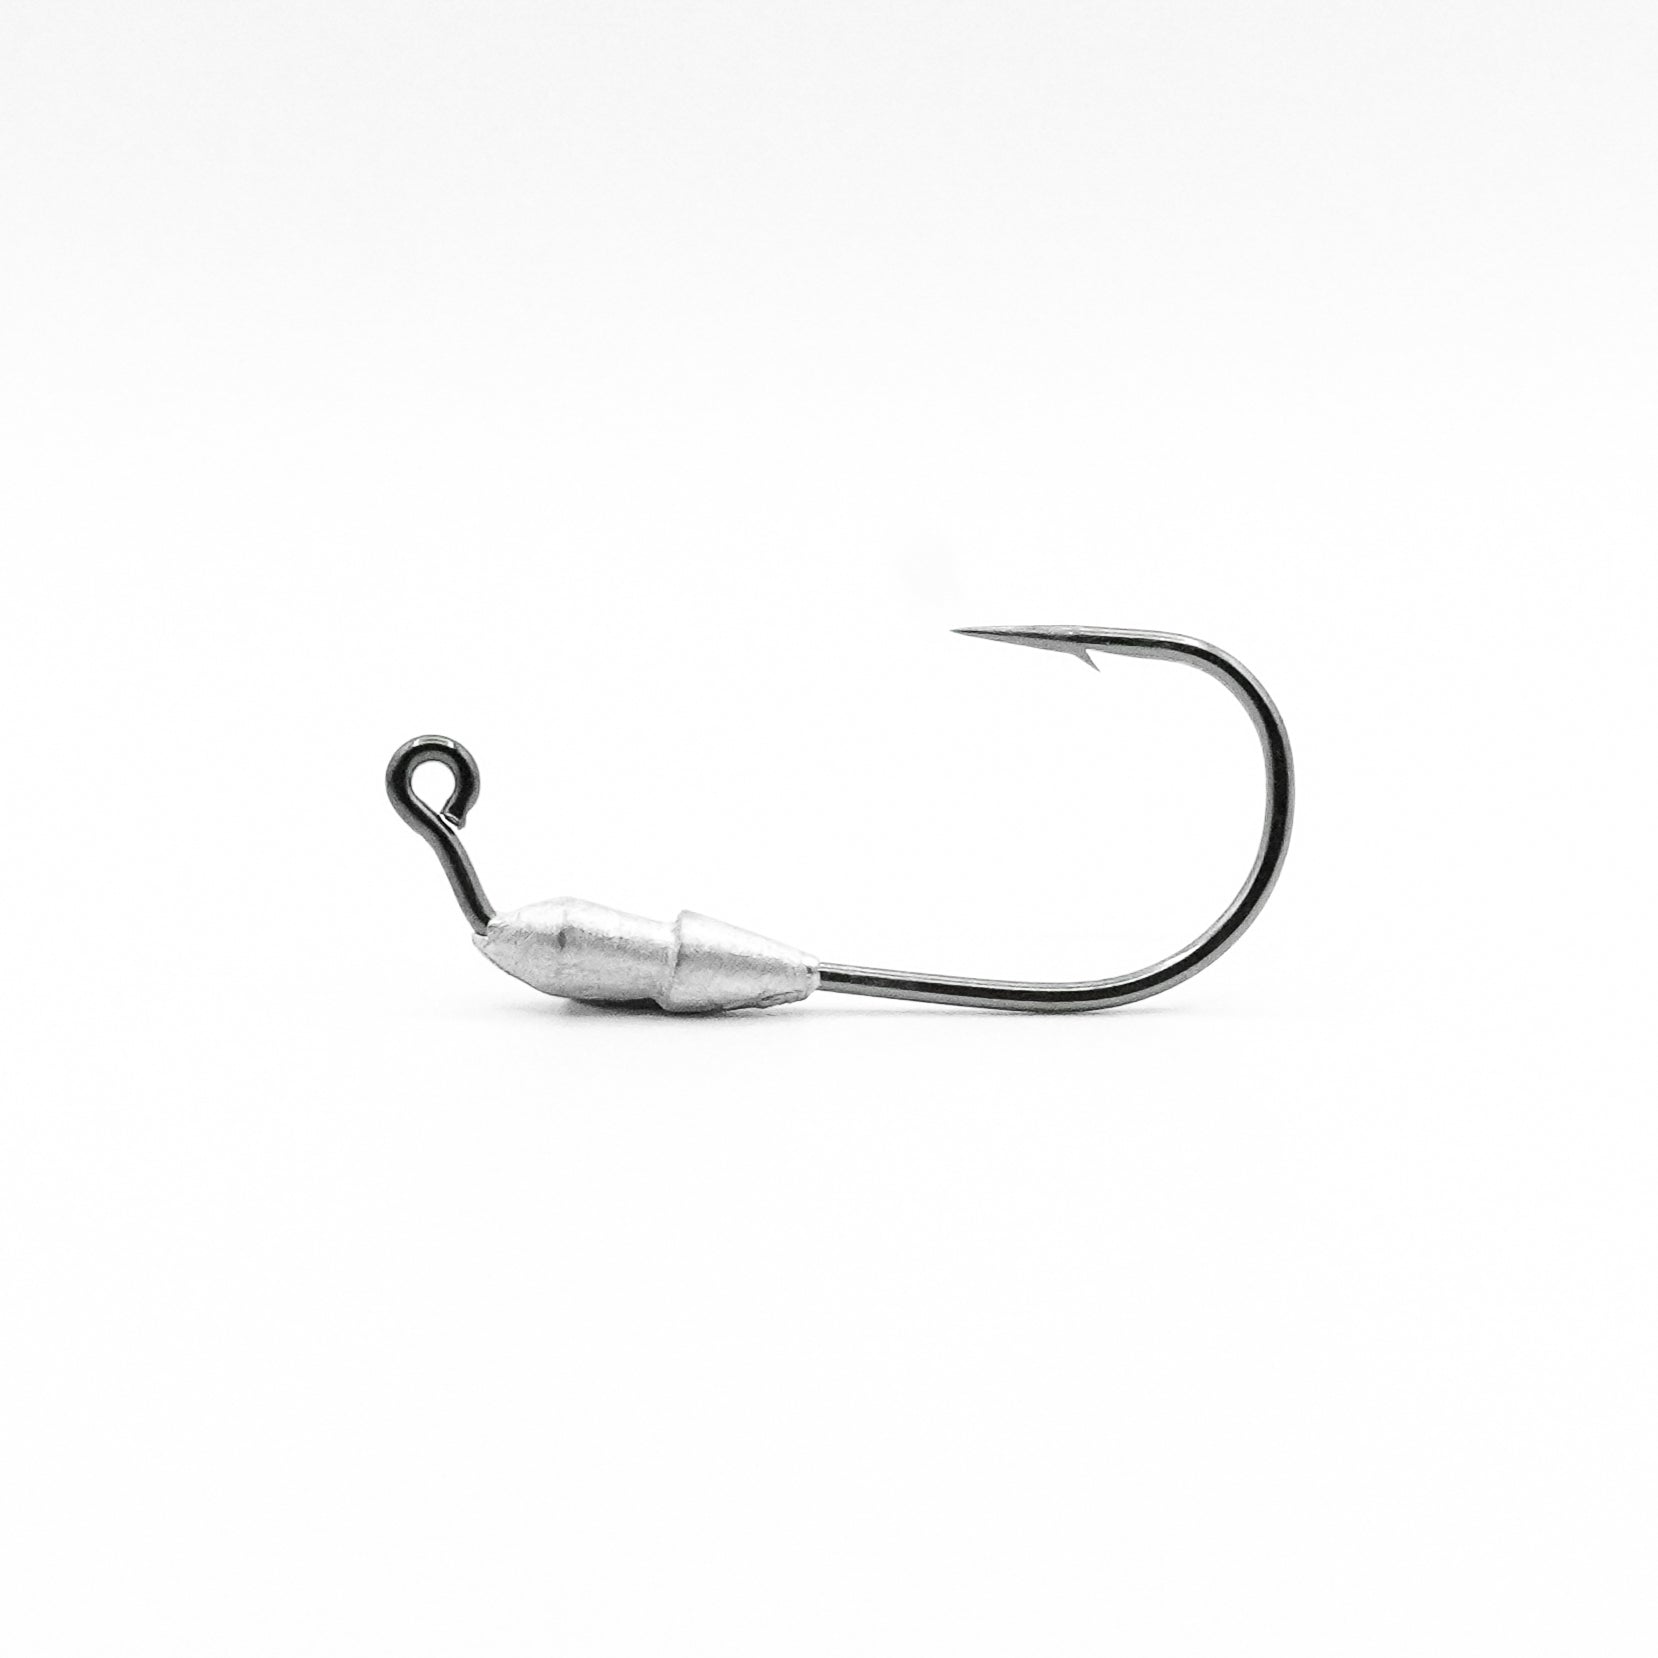 The Tush Rig from Core Tackle  Unique Swimbait Rigging Hook